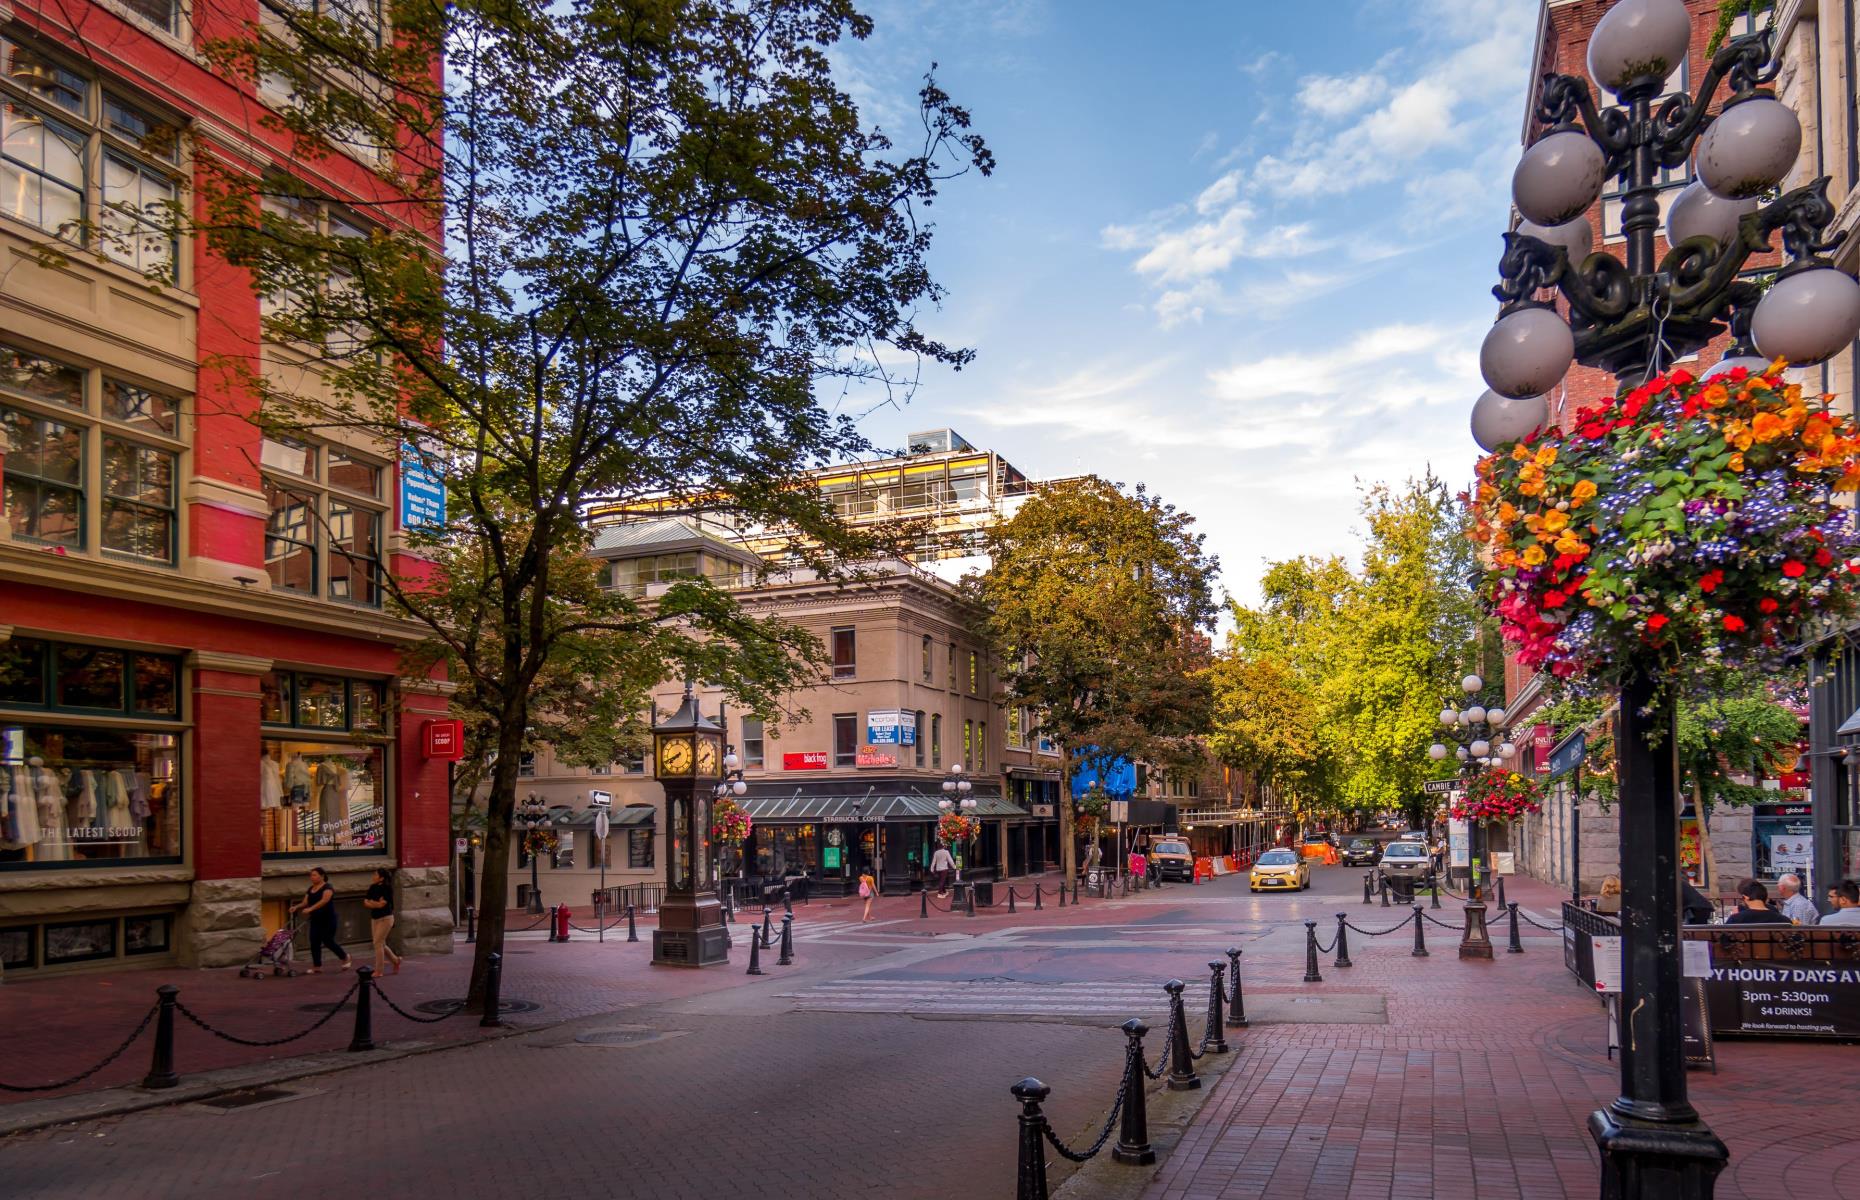 <p>Vancouver’s <a href="https://gastown.org">oldest neighborhood</a> is also one of its best. Gastown’s origins date back to 1867, and the area got its name from the neighborhood’s original tavern, founded by John 'Gassy Jack' Deighton. The main landmark is a fully operational steam clock, but modern Gastown’s big draw is its streets lined with cool restaurants, bookstores, boutiques and bars. It’s also adjacent to Vancouver’s Chinatown, another key West Coast neighborhood. </p>